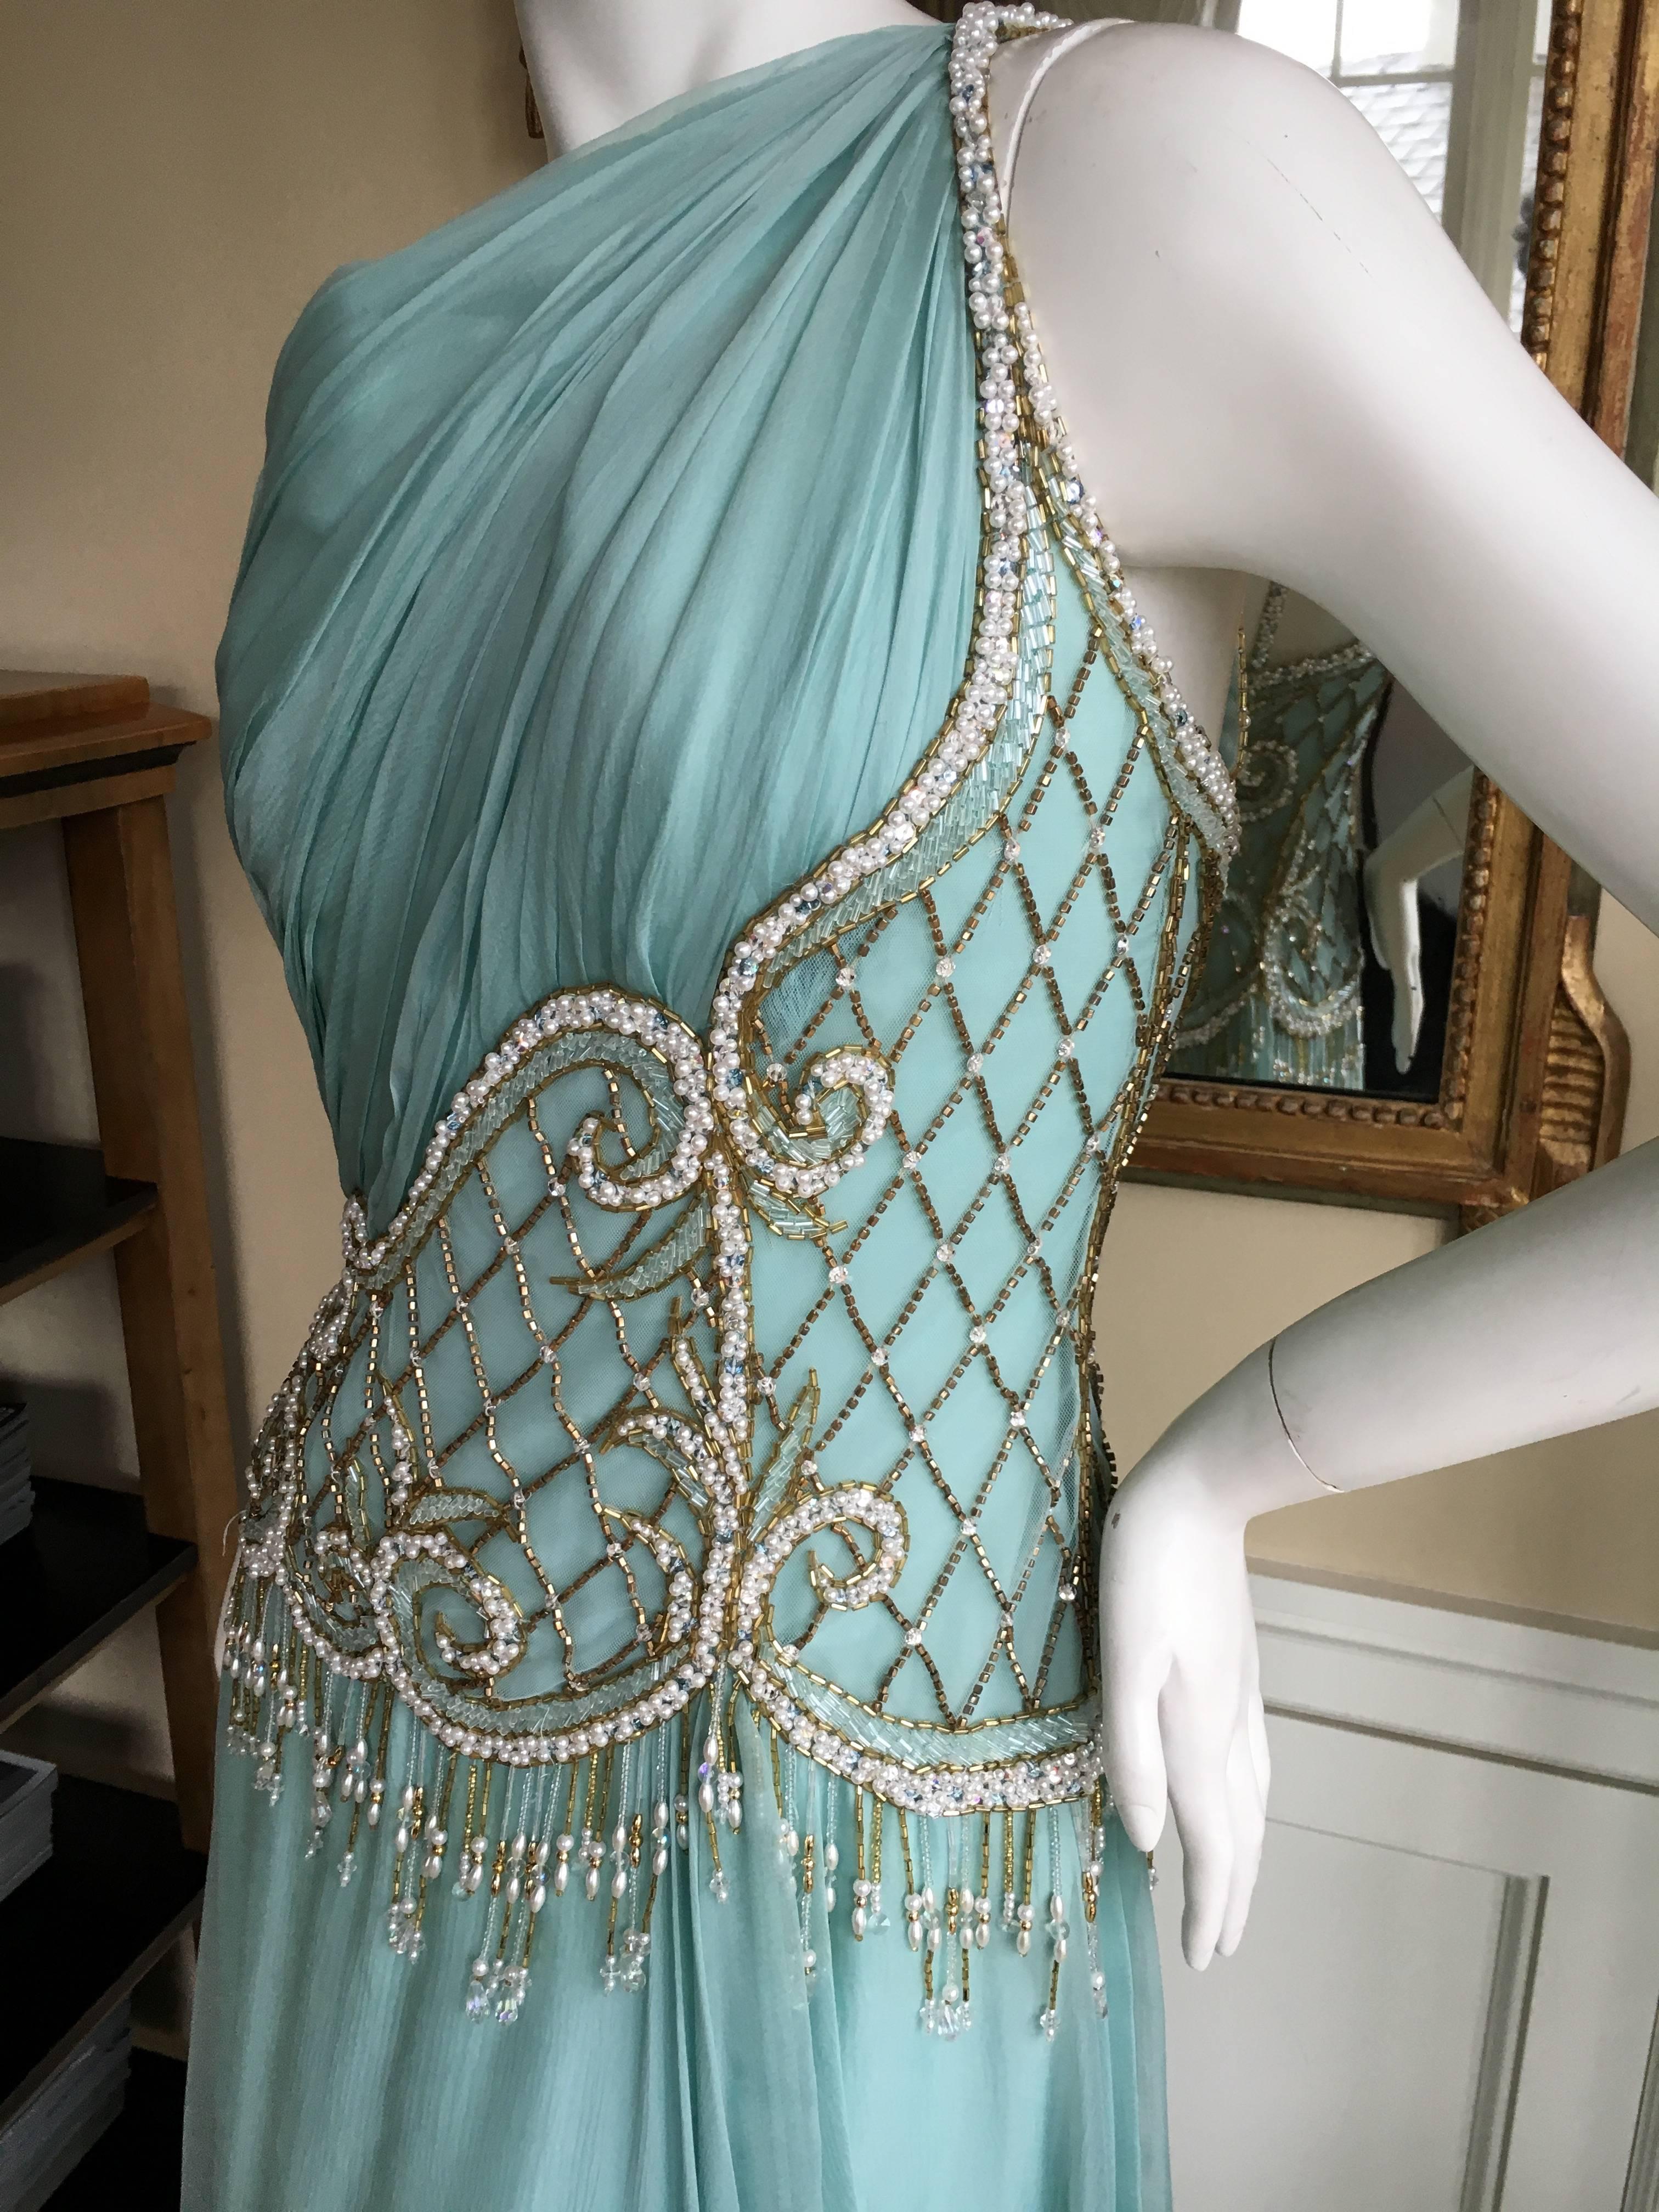 Women's Bob Mackie One Shoulder Turquoise Goddess Gown with Fringe Pearl Embellishment